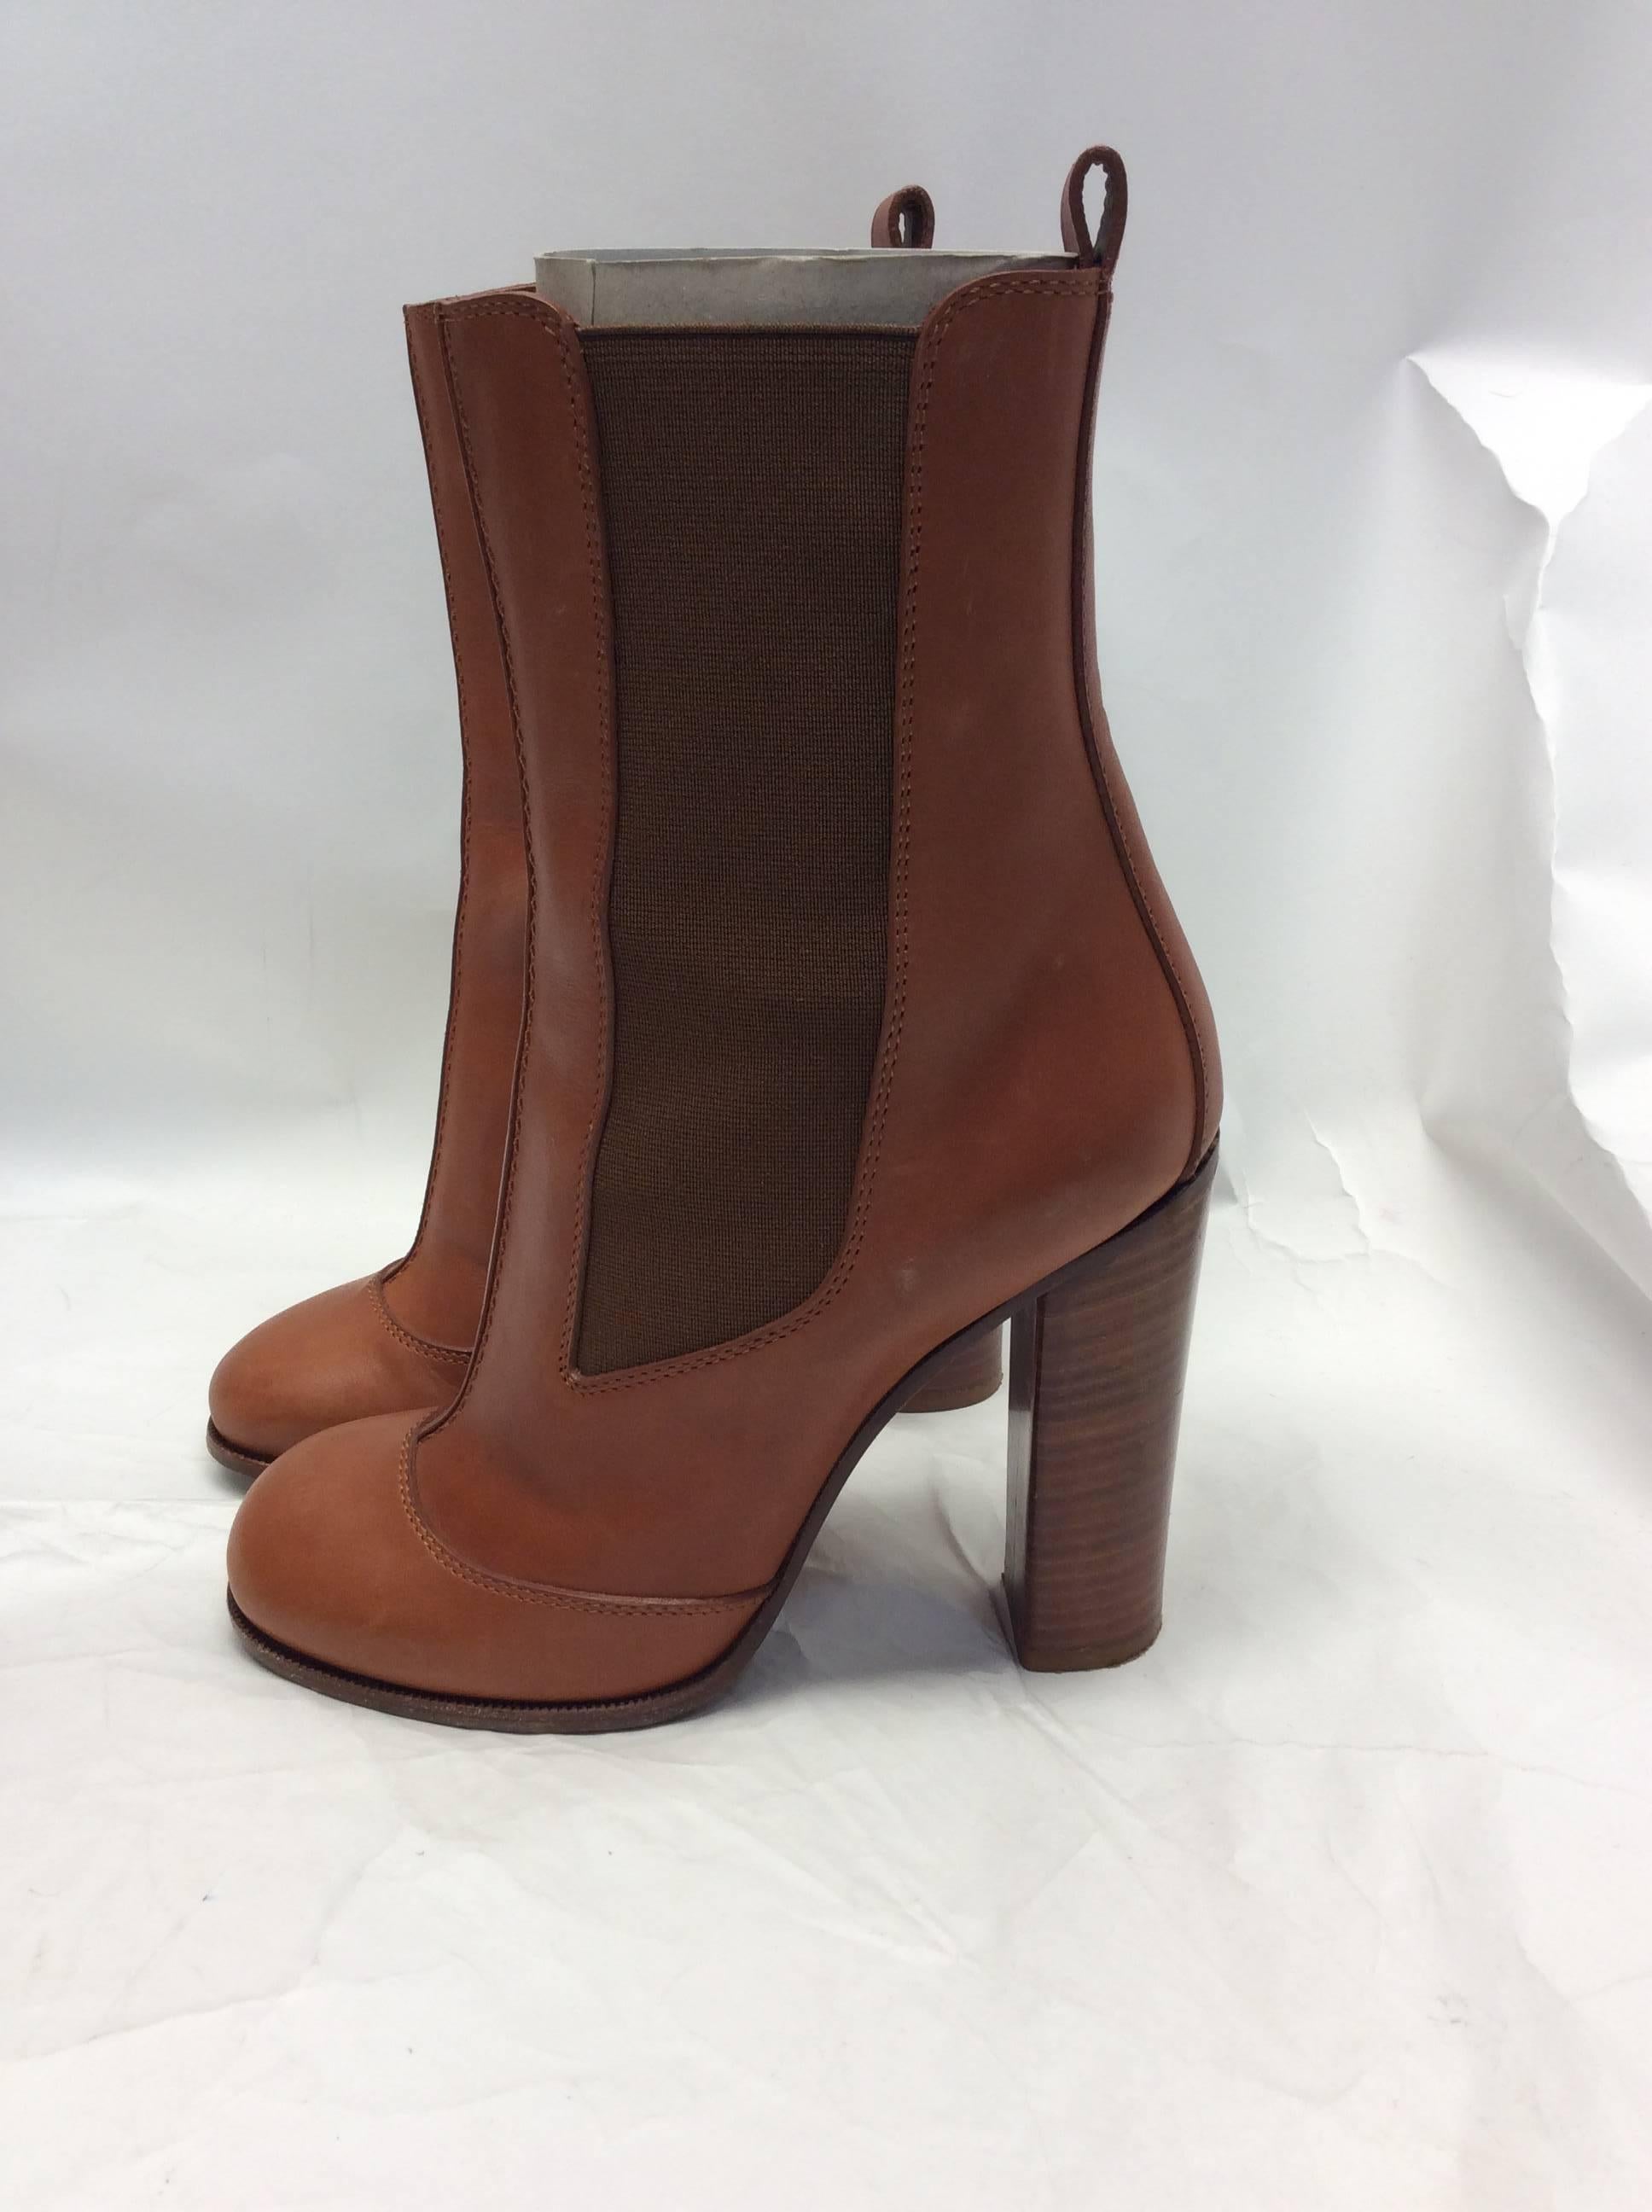 Celine Brown Leather Ankle Boots
*minor mark on the toe - see photo
Pull on style
4 inch heel
Made in Italy
$499

